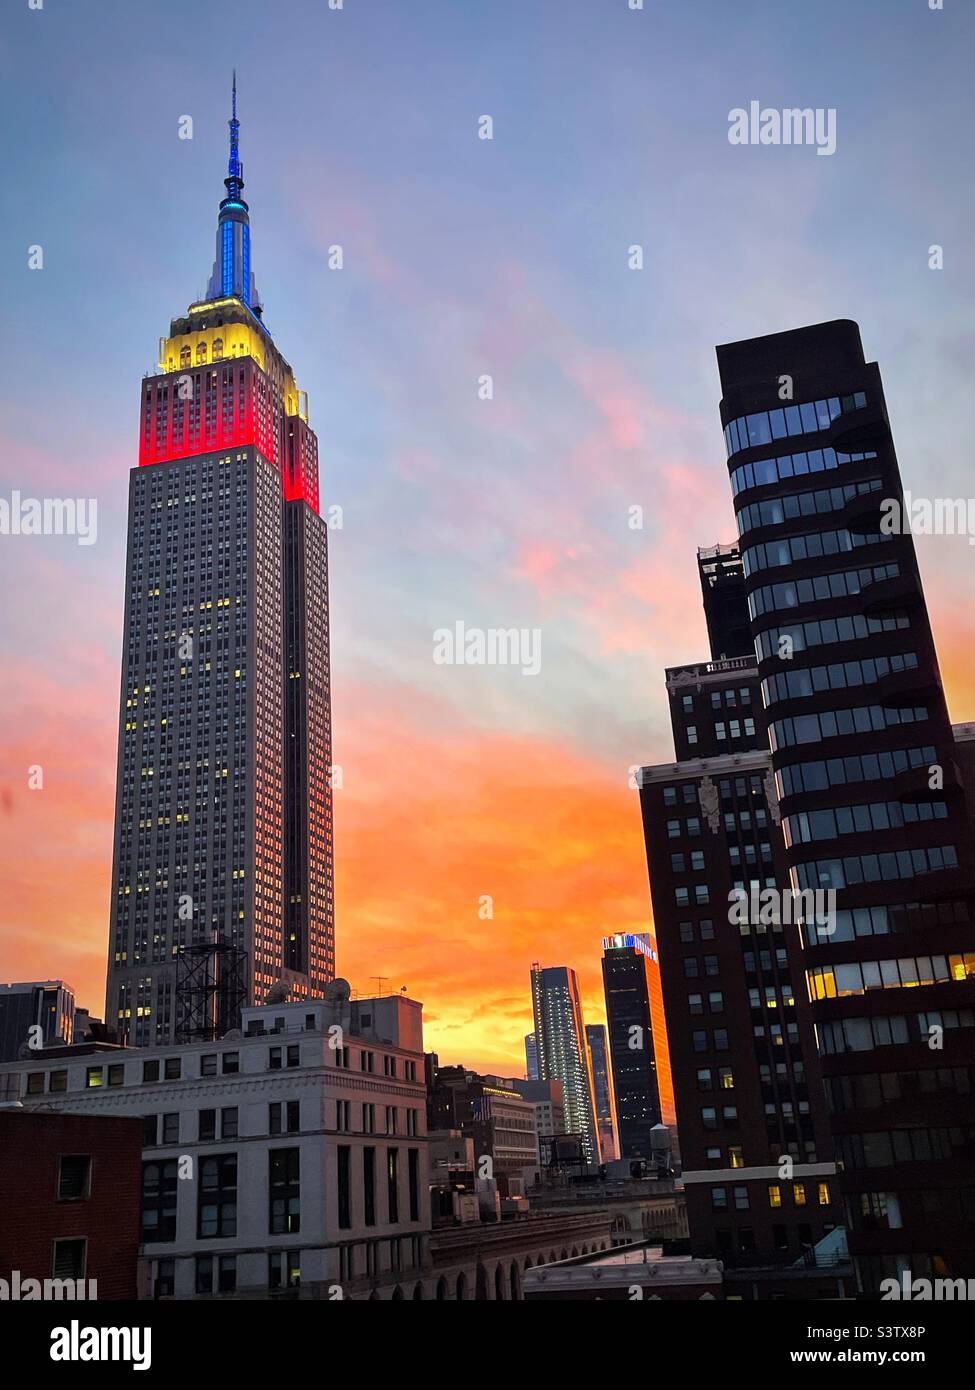 Sunset with a red white and blue brightly lighted Empire State building in the foreground, 2022, New York City, USA Stock Photo